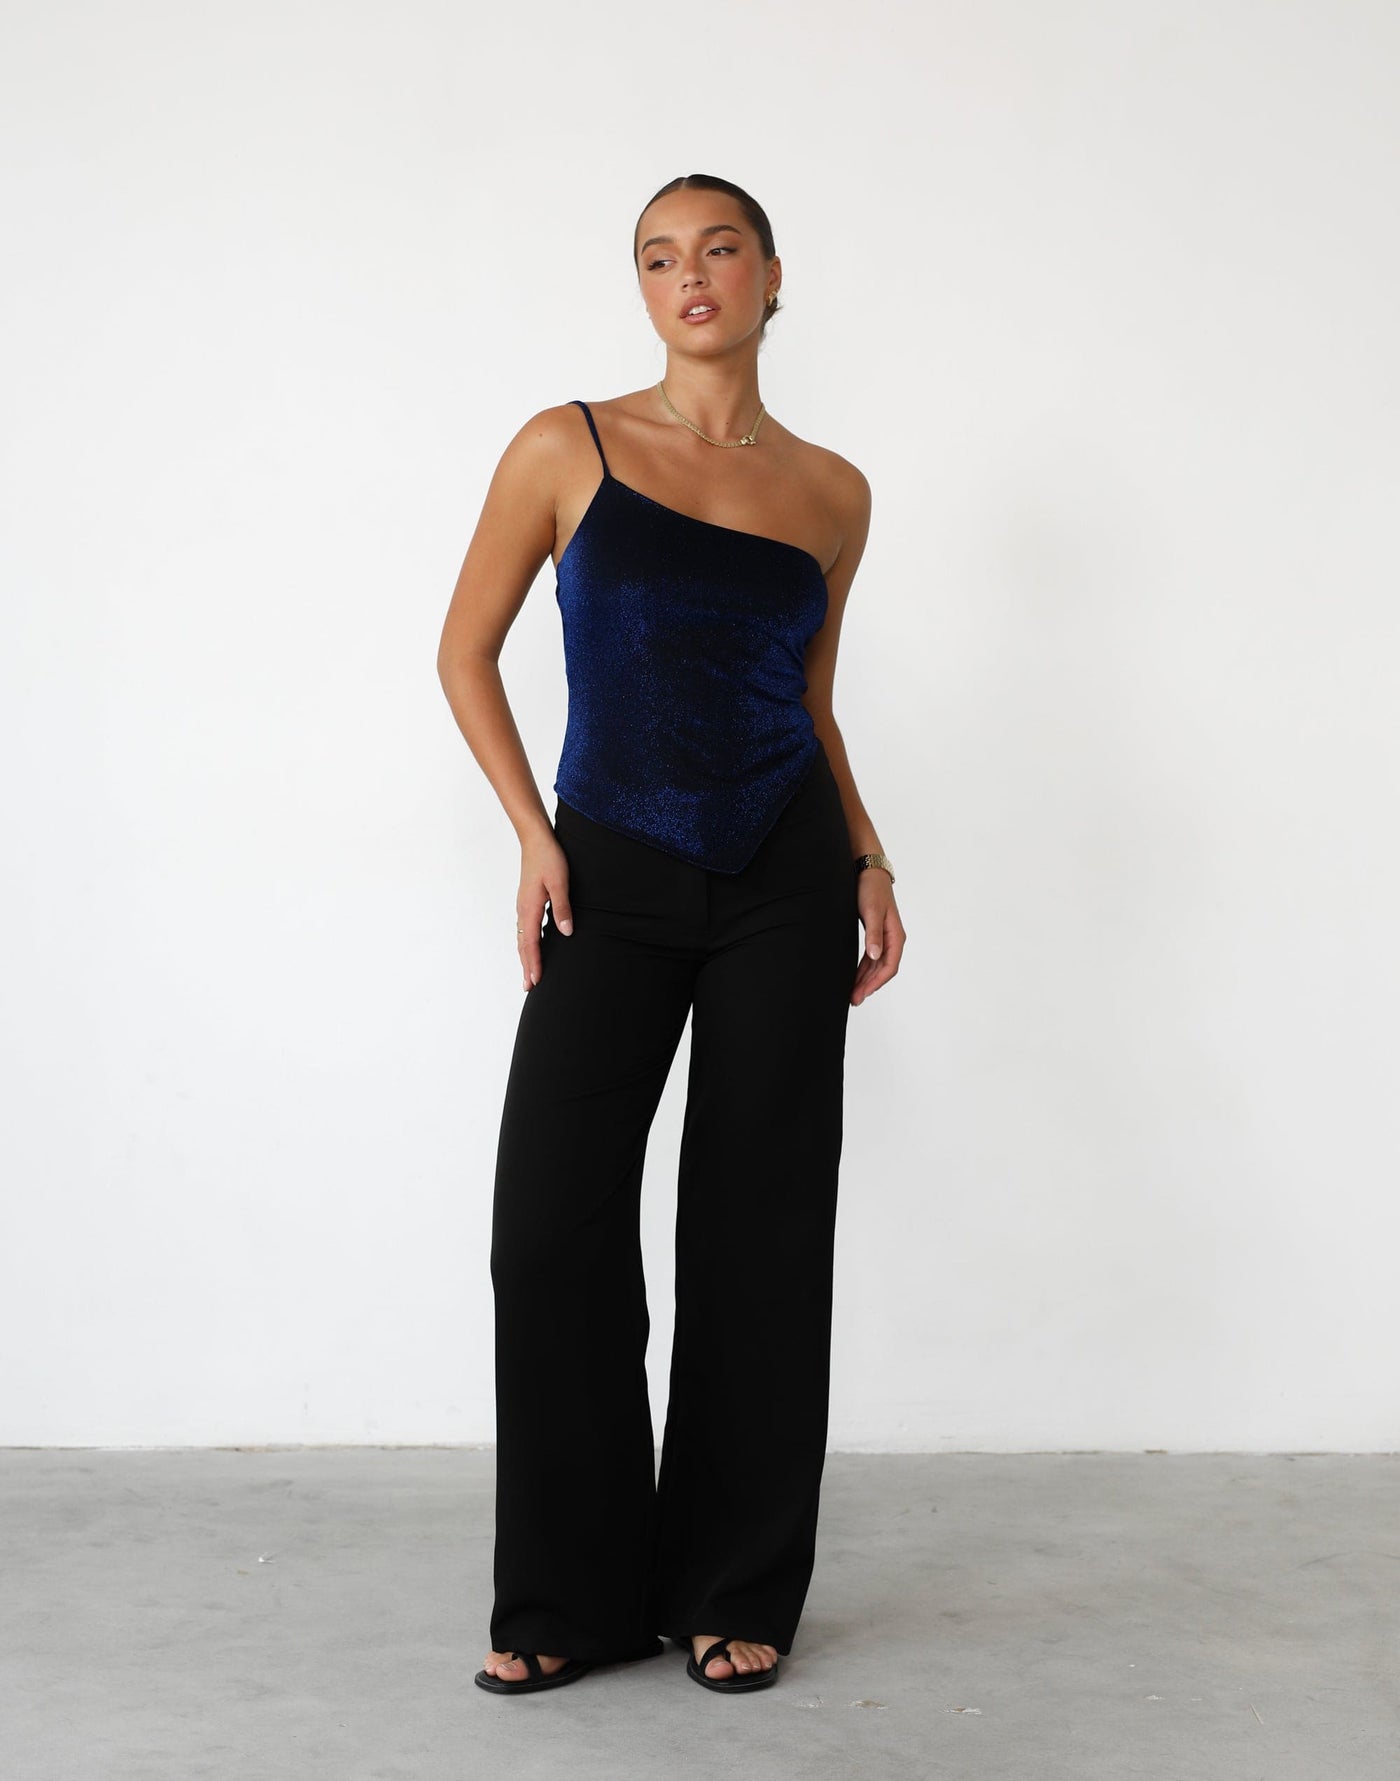 Fantasise Top (Deep Blue) - Glitter-like One Strap Crop Top - Women's Top - Charcoal Clothing